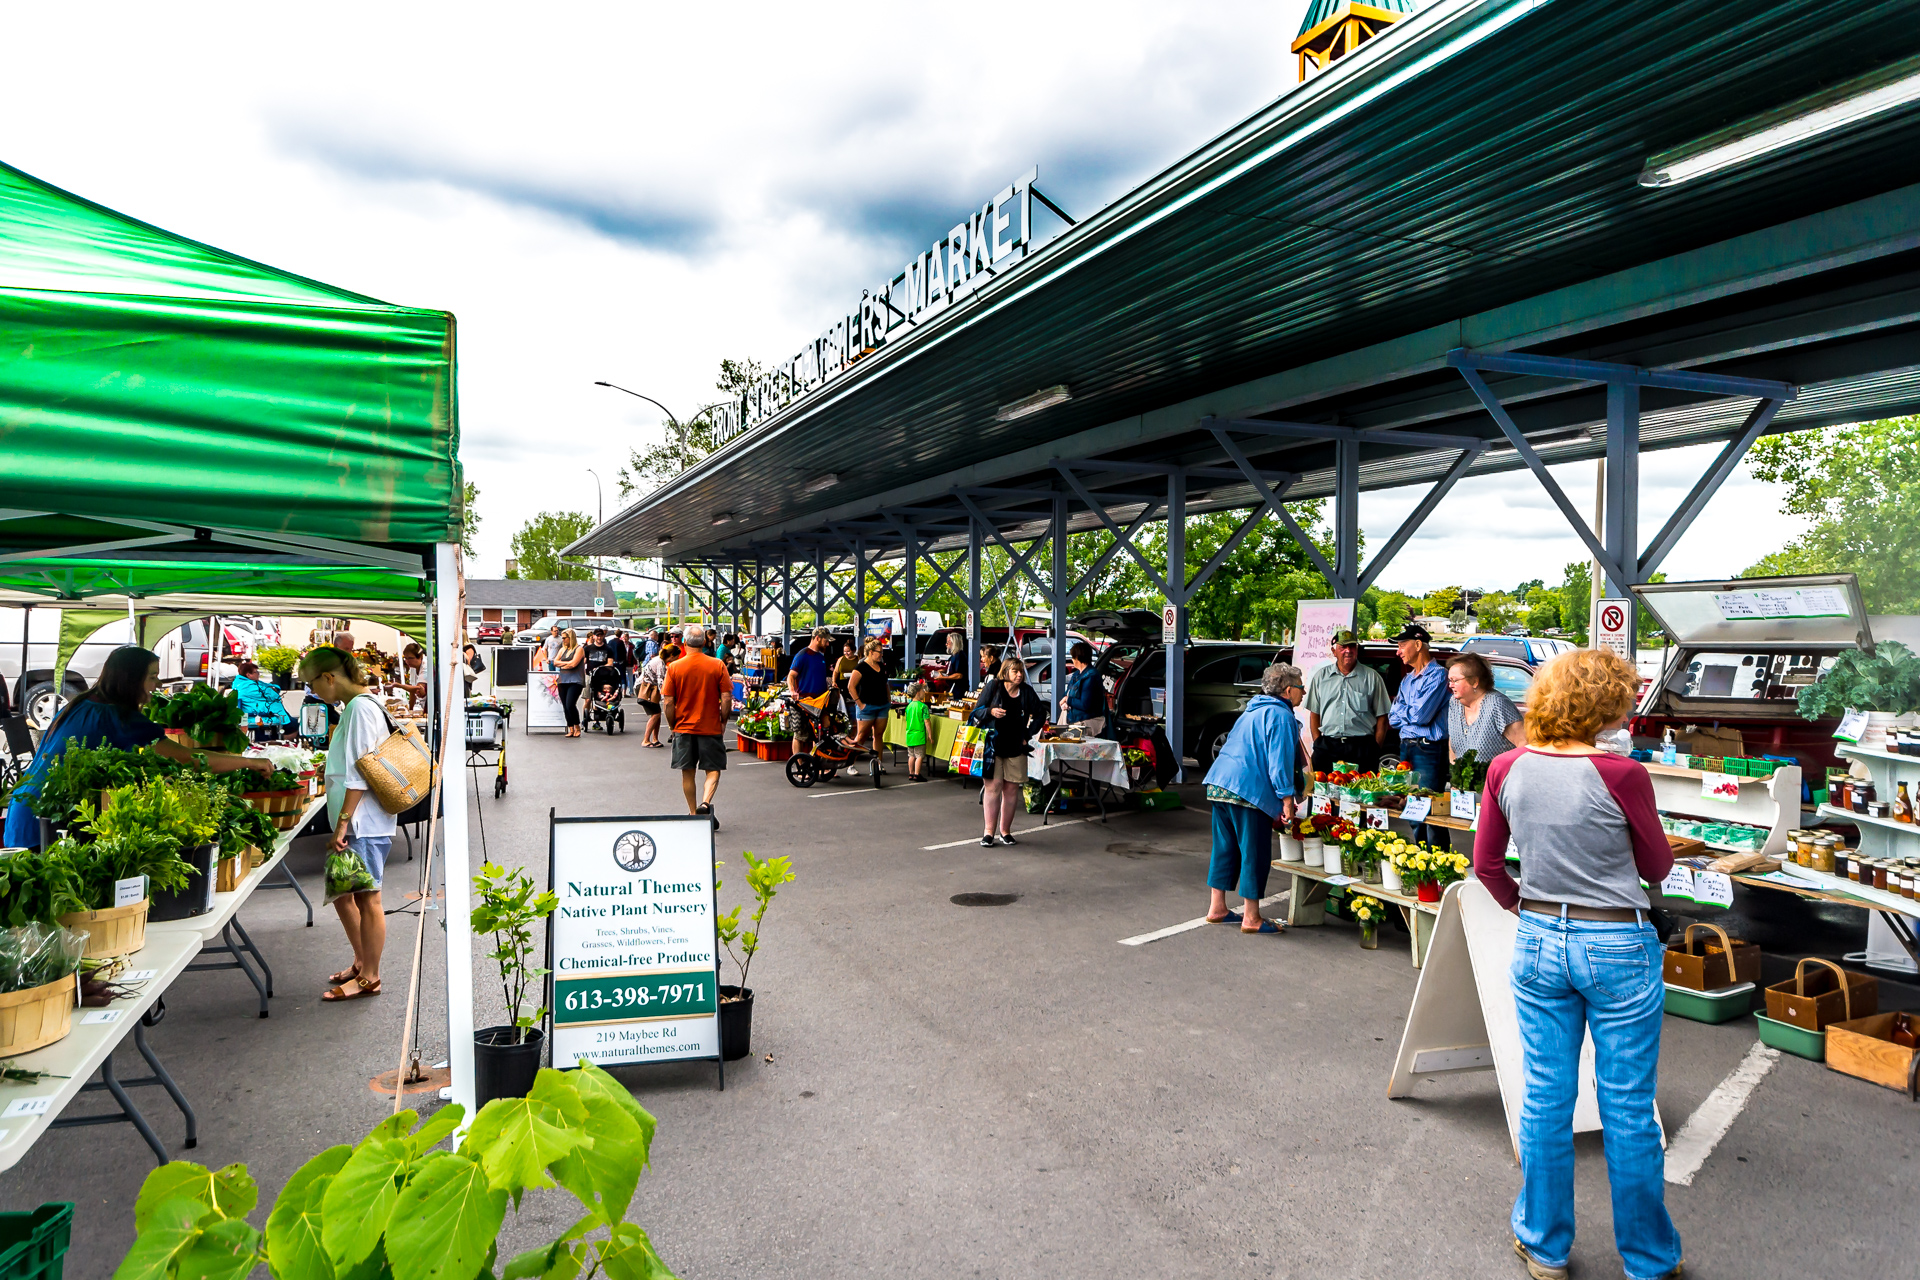 Photo of an outdoor Farmer's Market scene with individuals shopping.